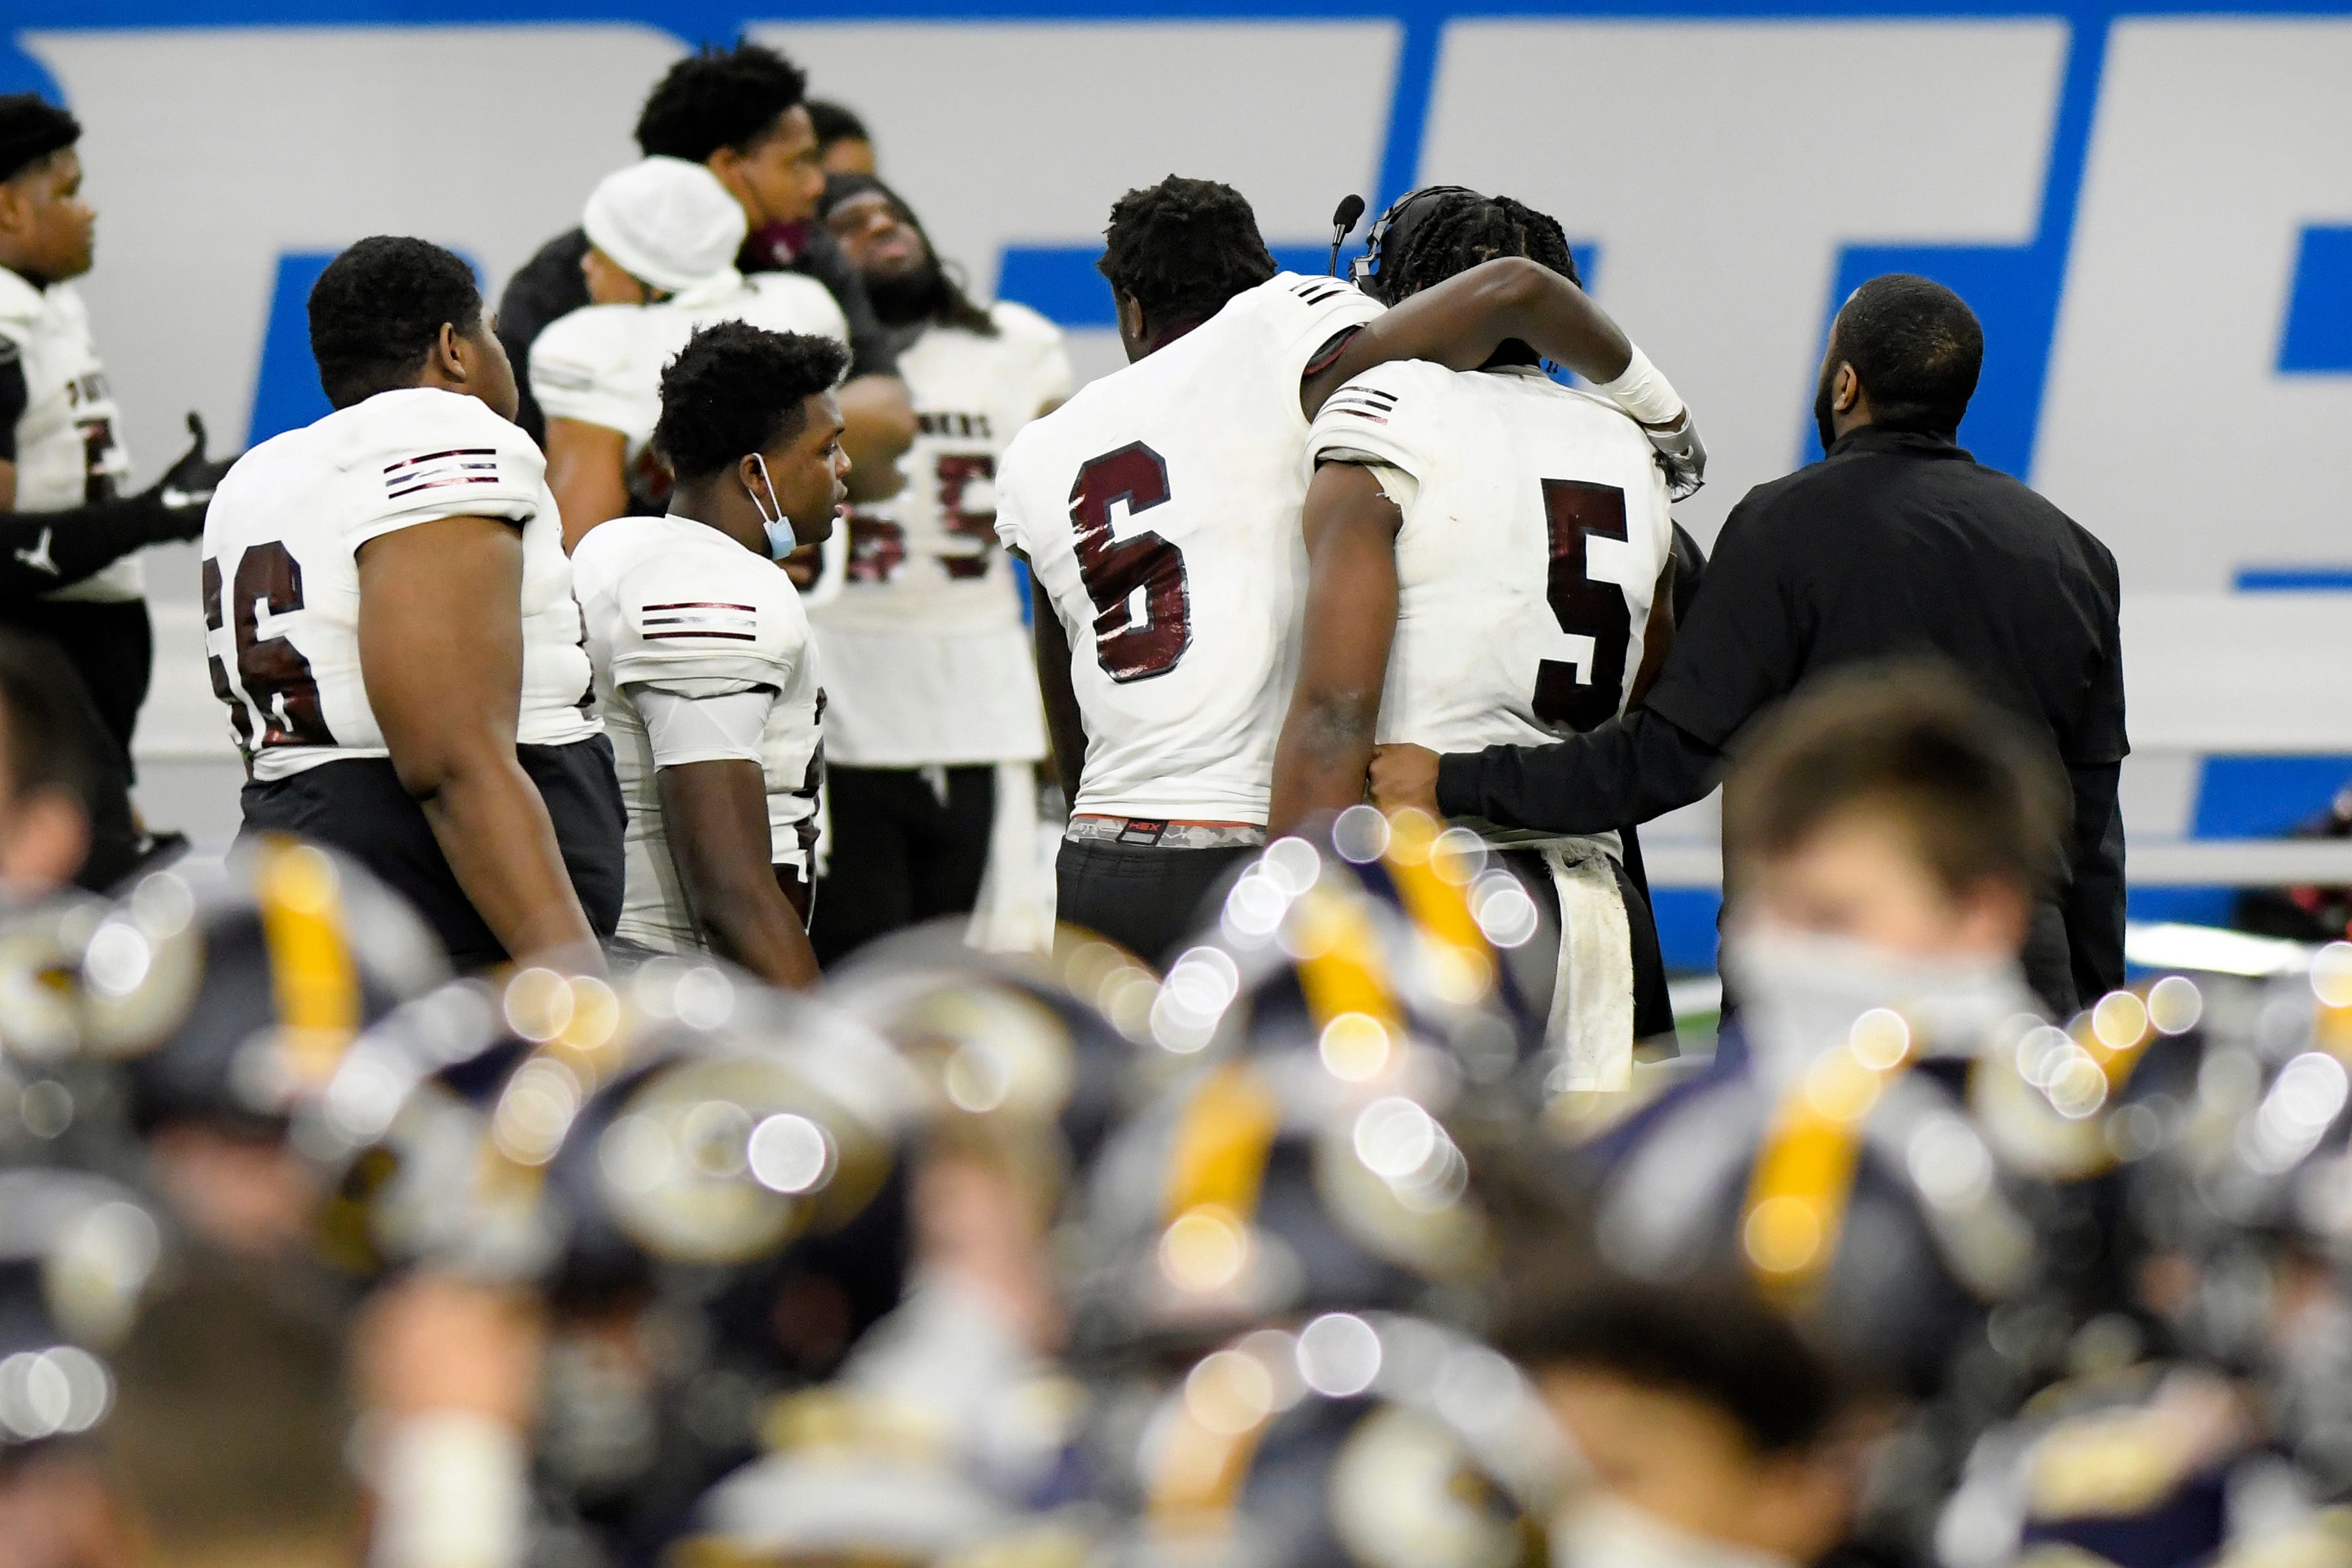 As the DeWitt football team celebrates in the foreground, River Rouge's Davon Jackson (6) consoles quarterback Mareyohn Hrabowski Saturday, Jan. 23, 2021, at Ford Field in Detroit. DeWitt defeated River Rouge 40-30.